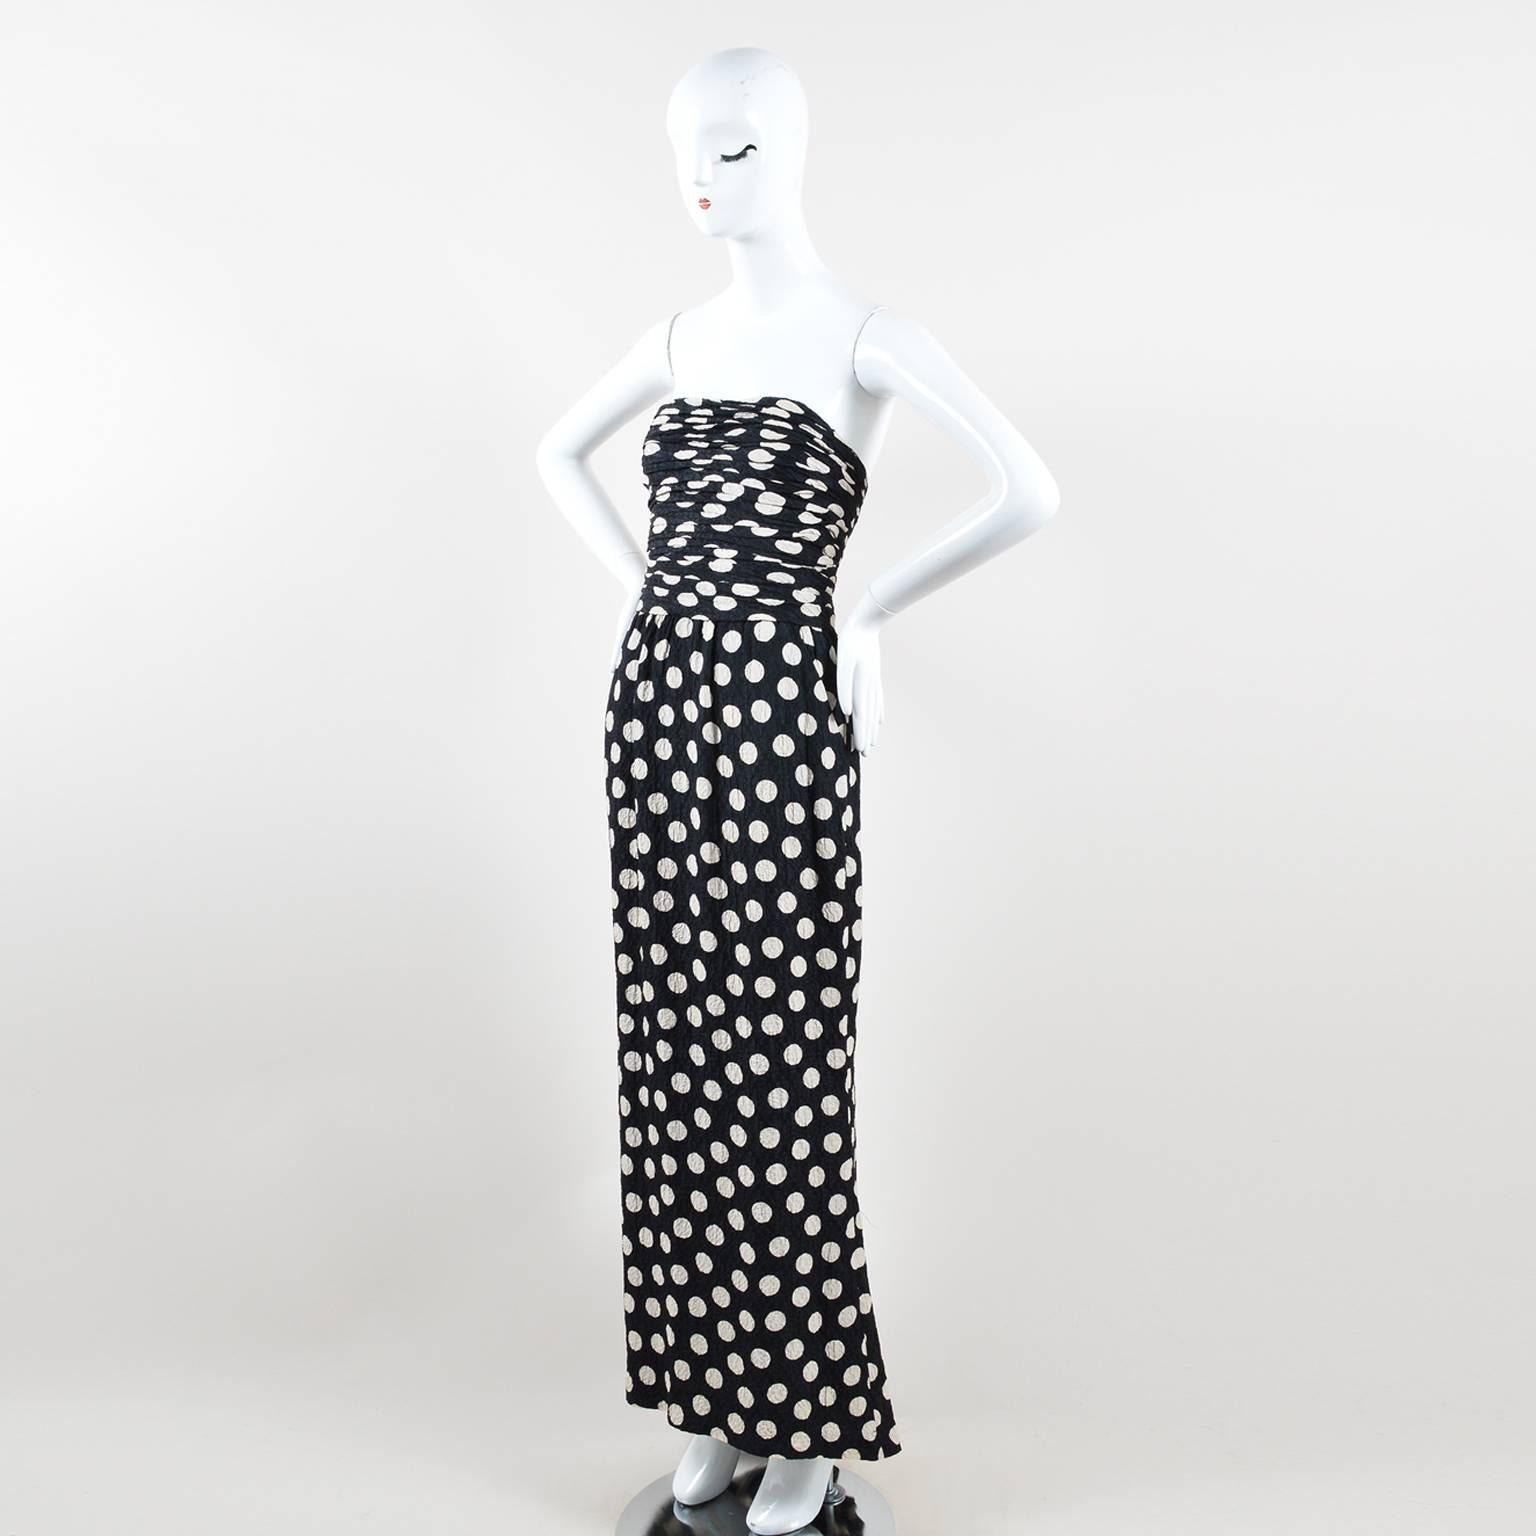 Lightweight hammered silk strapless evening gown. Black base with cream polka dots throughout. Ruched pleating throughout bodice. Light boning throughout bodice for shape and support. Column-silhouette skirt. Slant hip pockets. Back hem is slightly